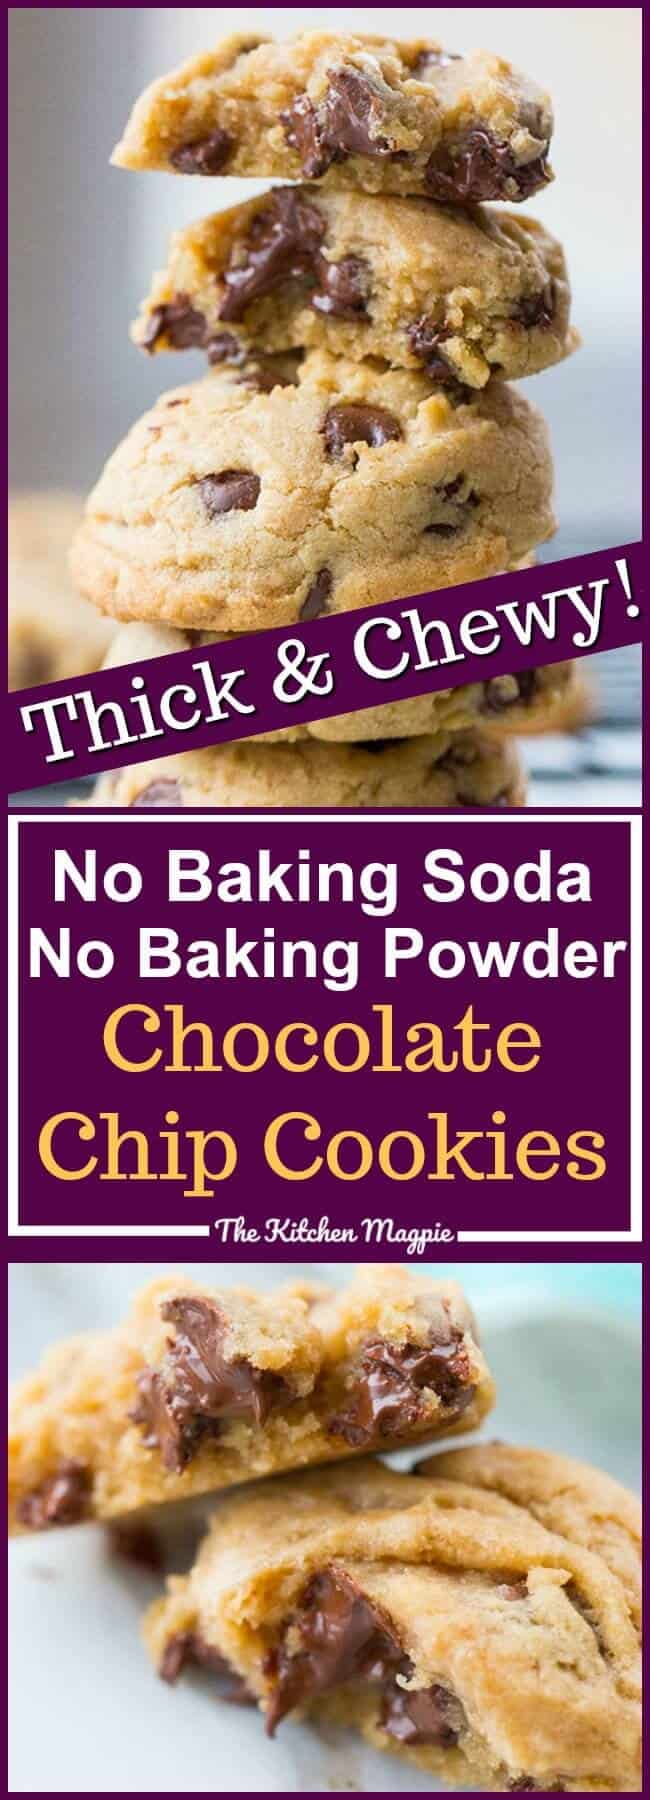 How to make delicious chocolate chip cookies recipe without baking soda or baking powder! This recipe will ensure that you have amazing cookies - without baking powder or soda! Recipe from @kitchenmagpie 